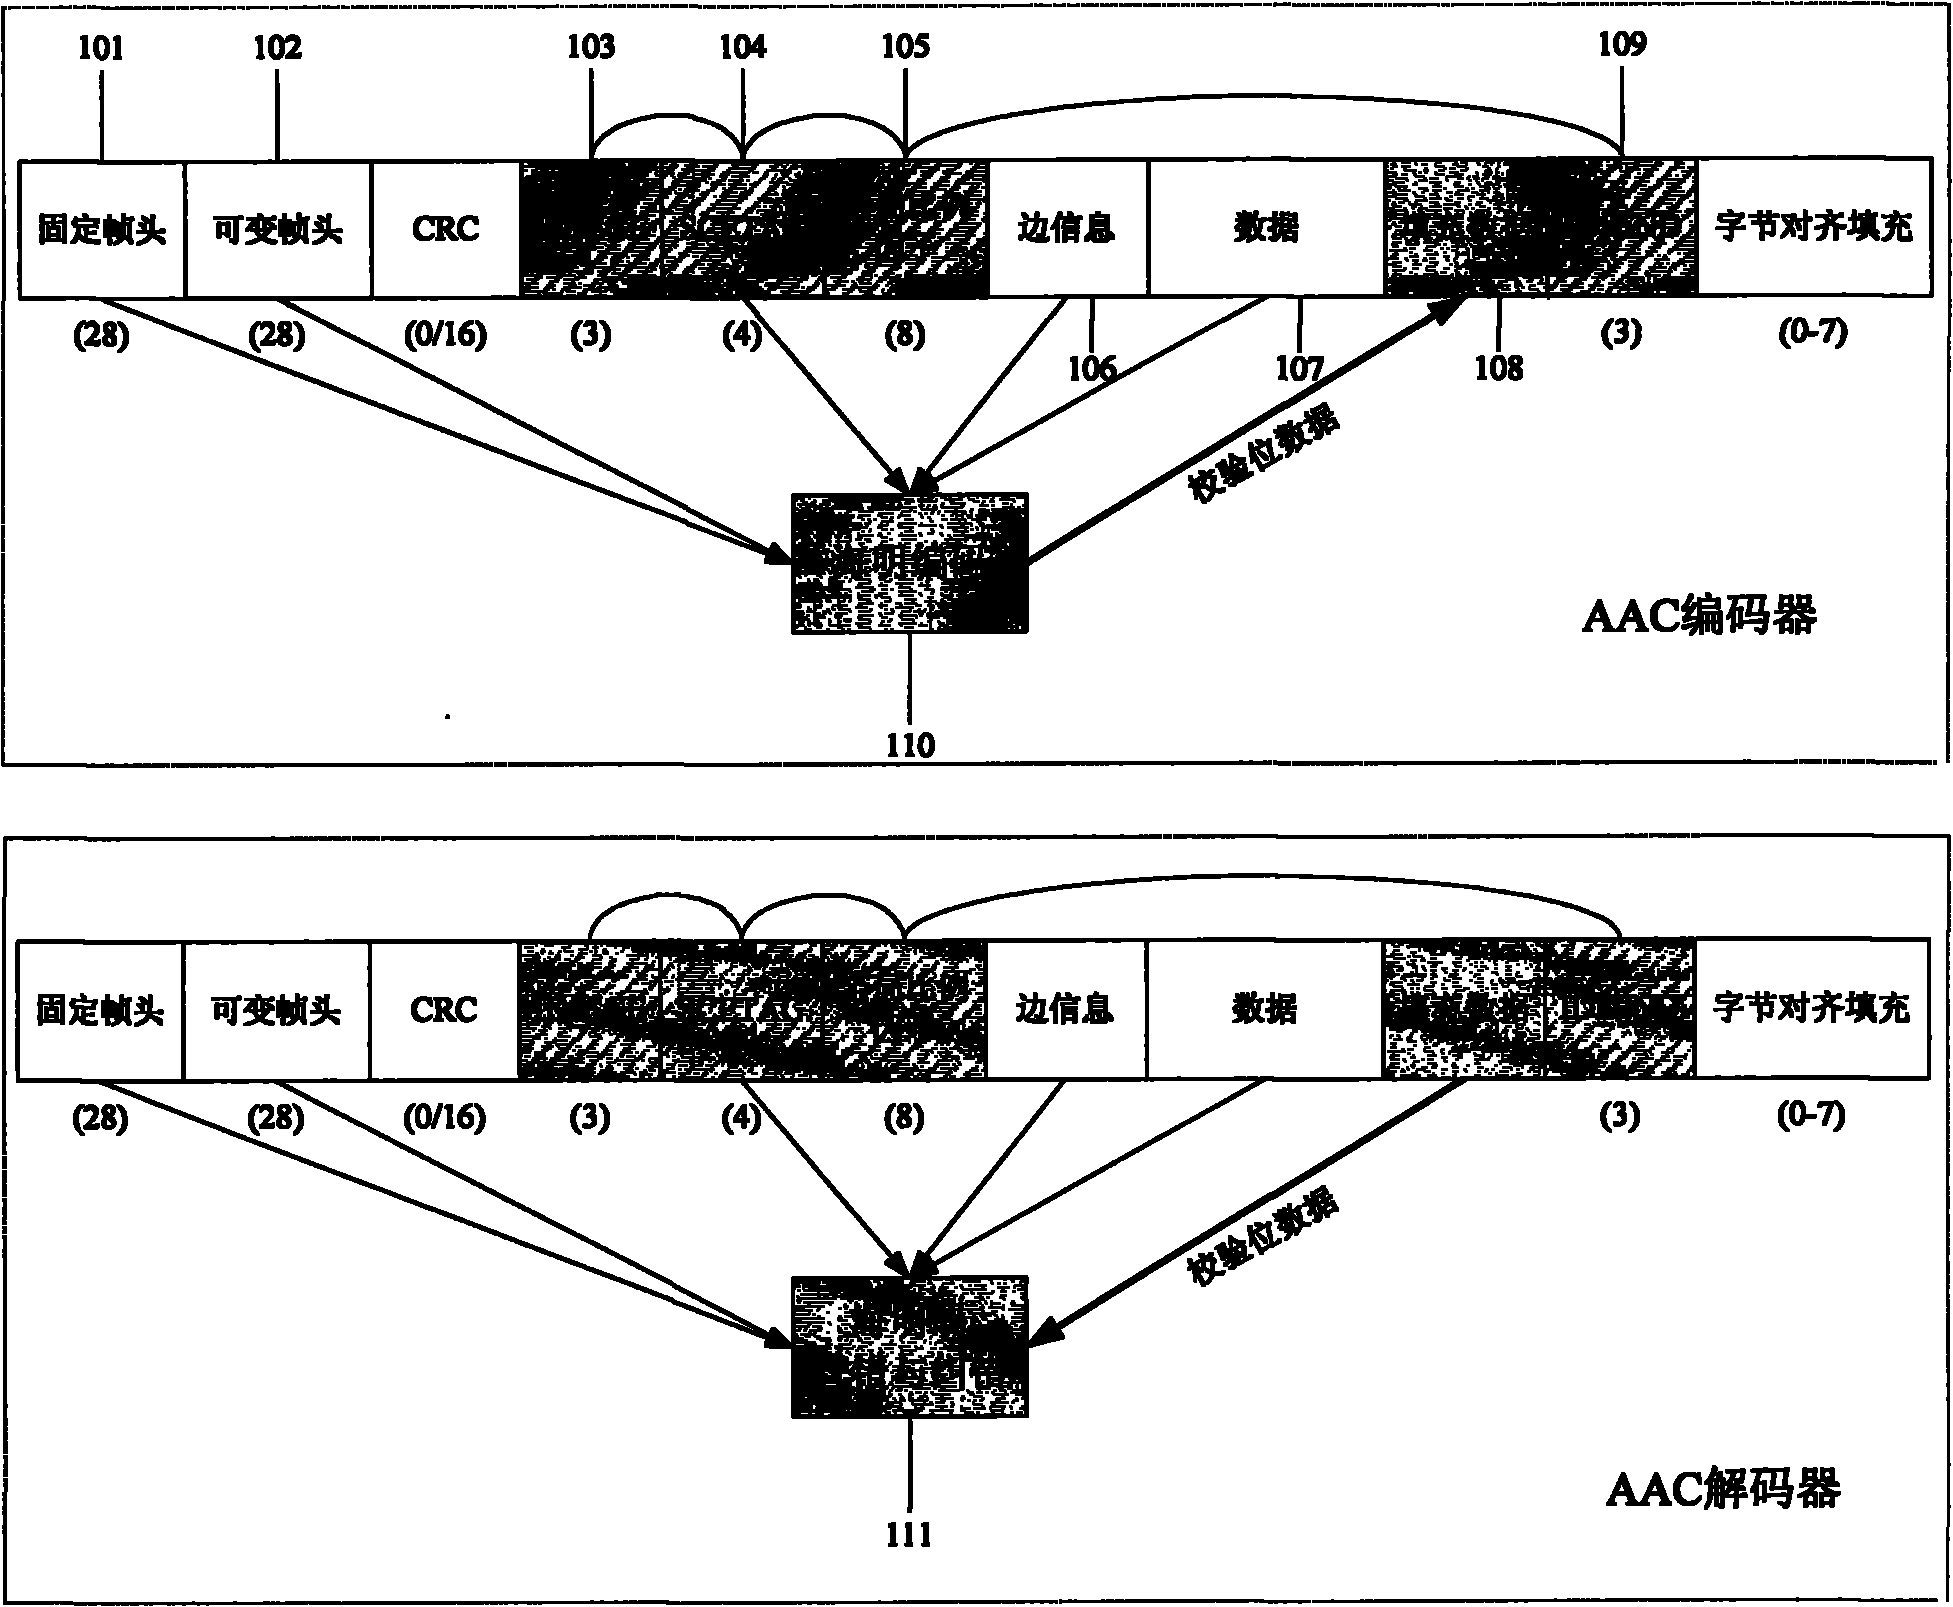 FAAC and FAAD2-based single track constant bit rate audio realtime coding and decoding error correcting method